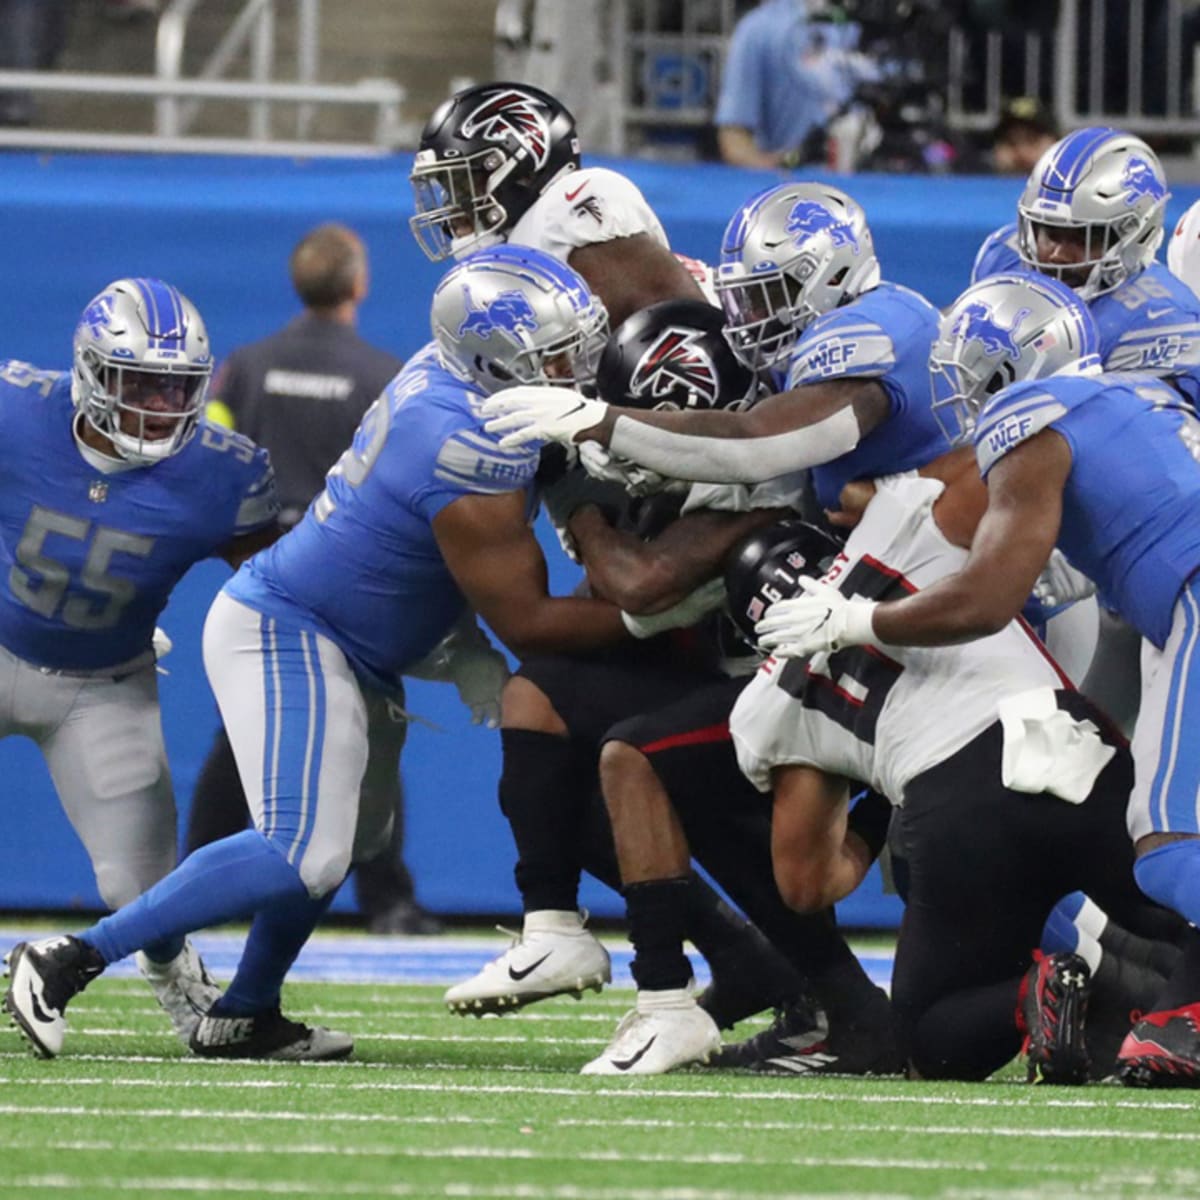 Lions-Falcons predictions: Detroit expected to bounce back after